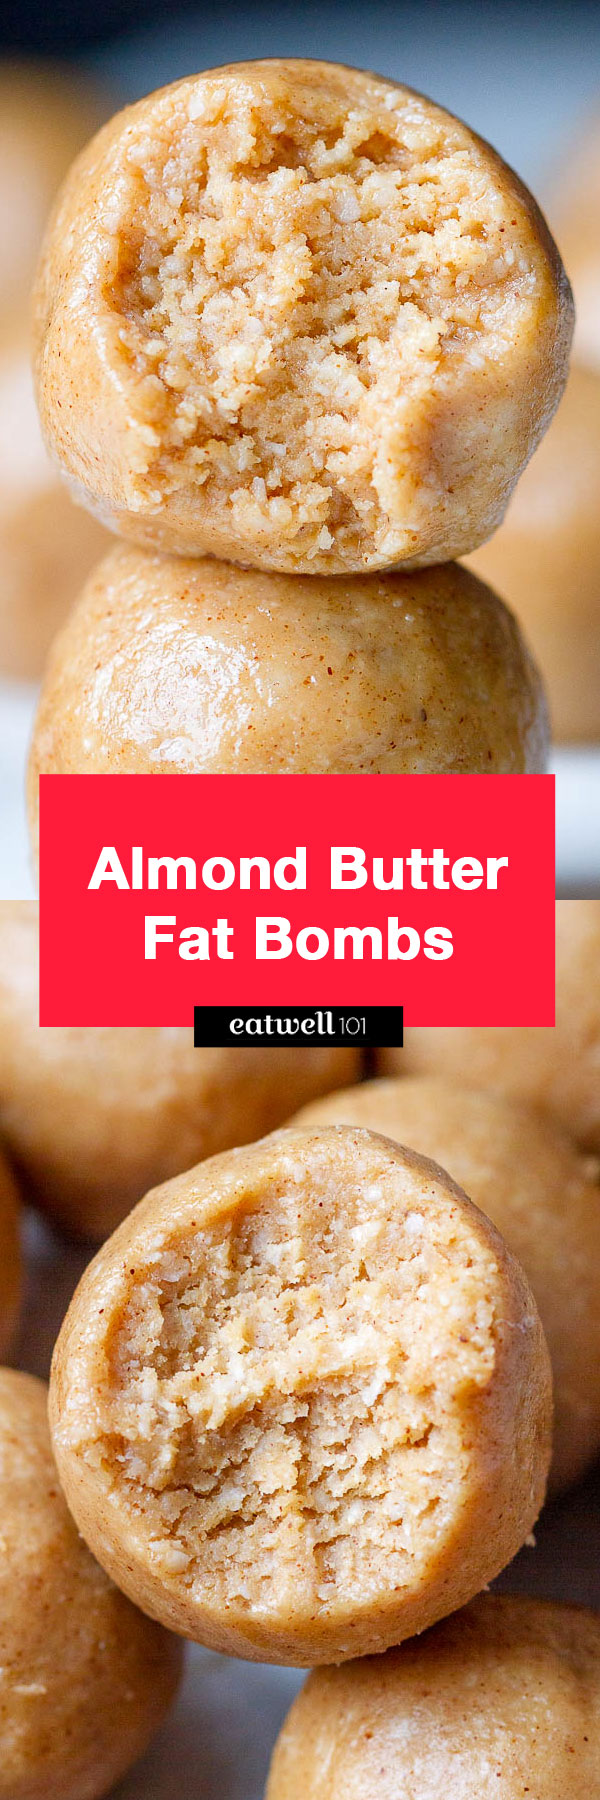 3-Ingredient Almond Butter Fat Bombs - So yummy! These little low carb, keto snacks help reduce sugar and carb cravings.